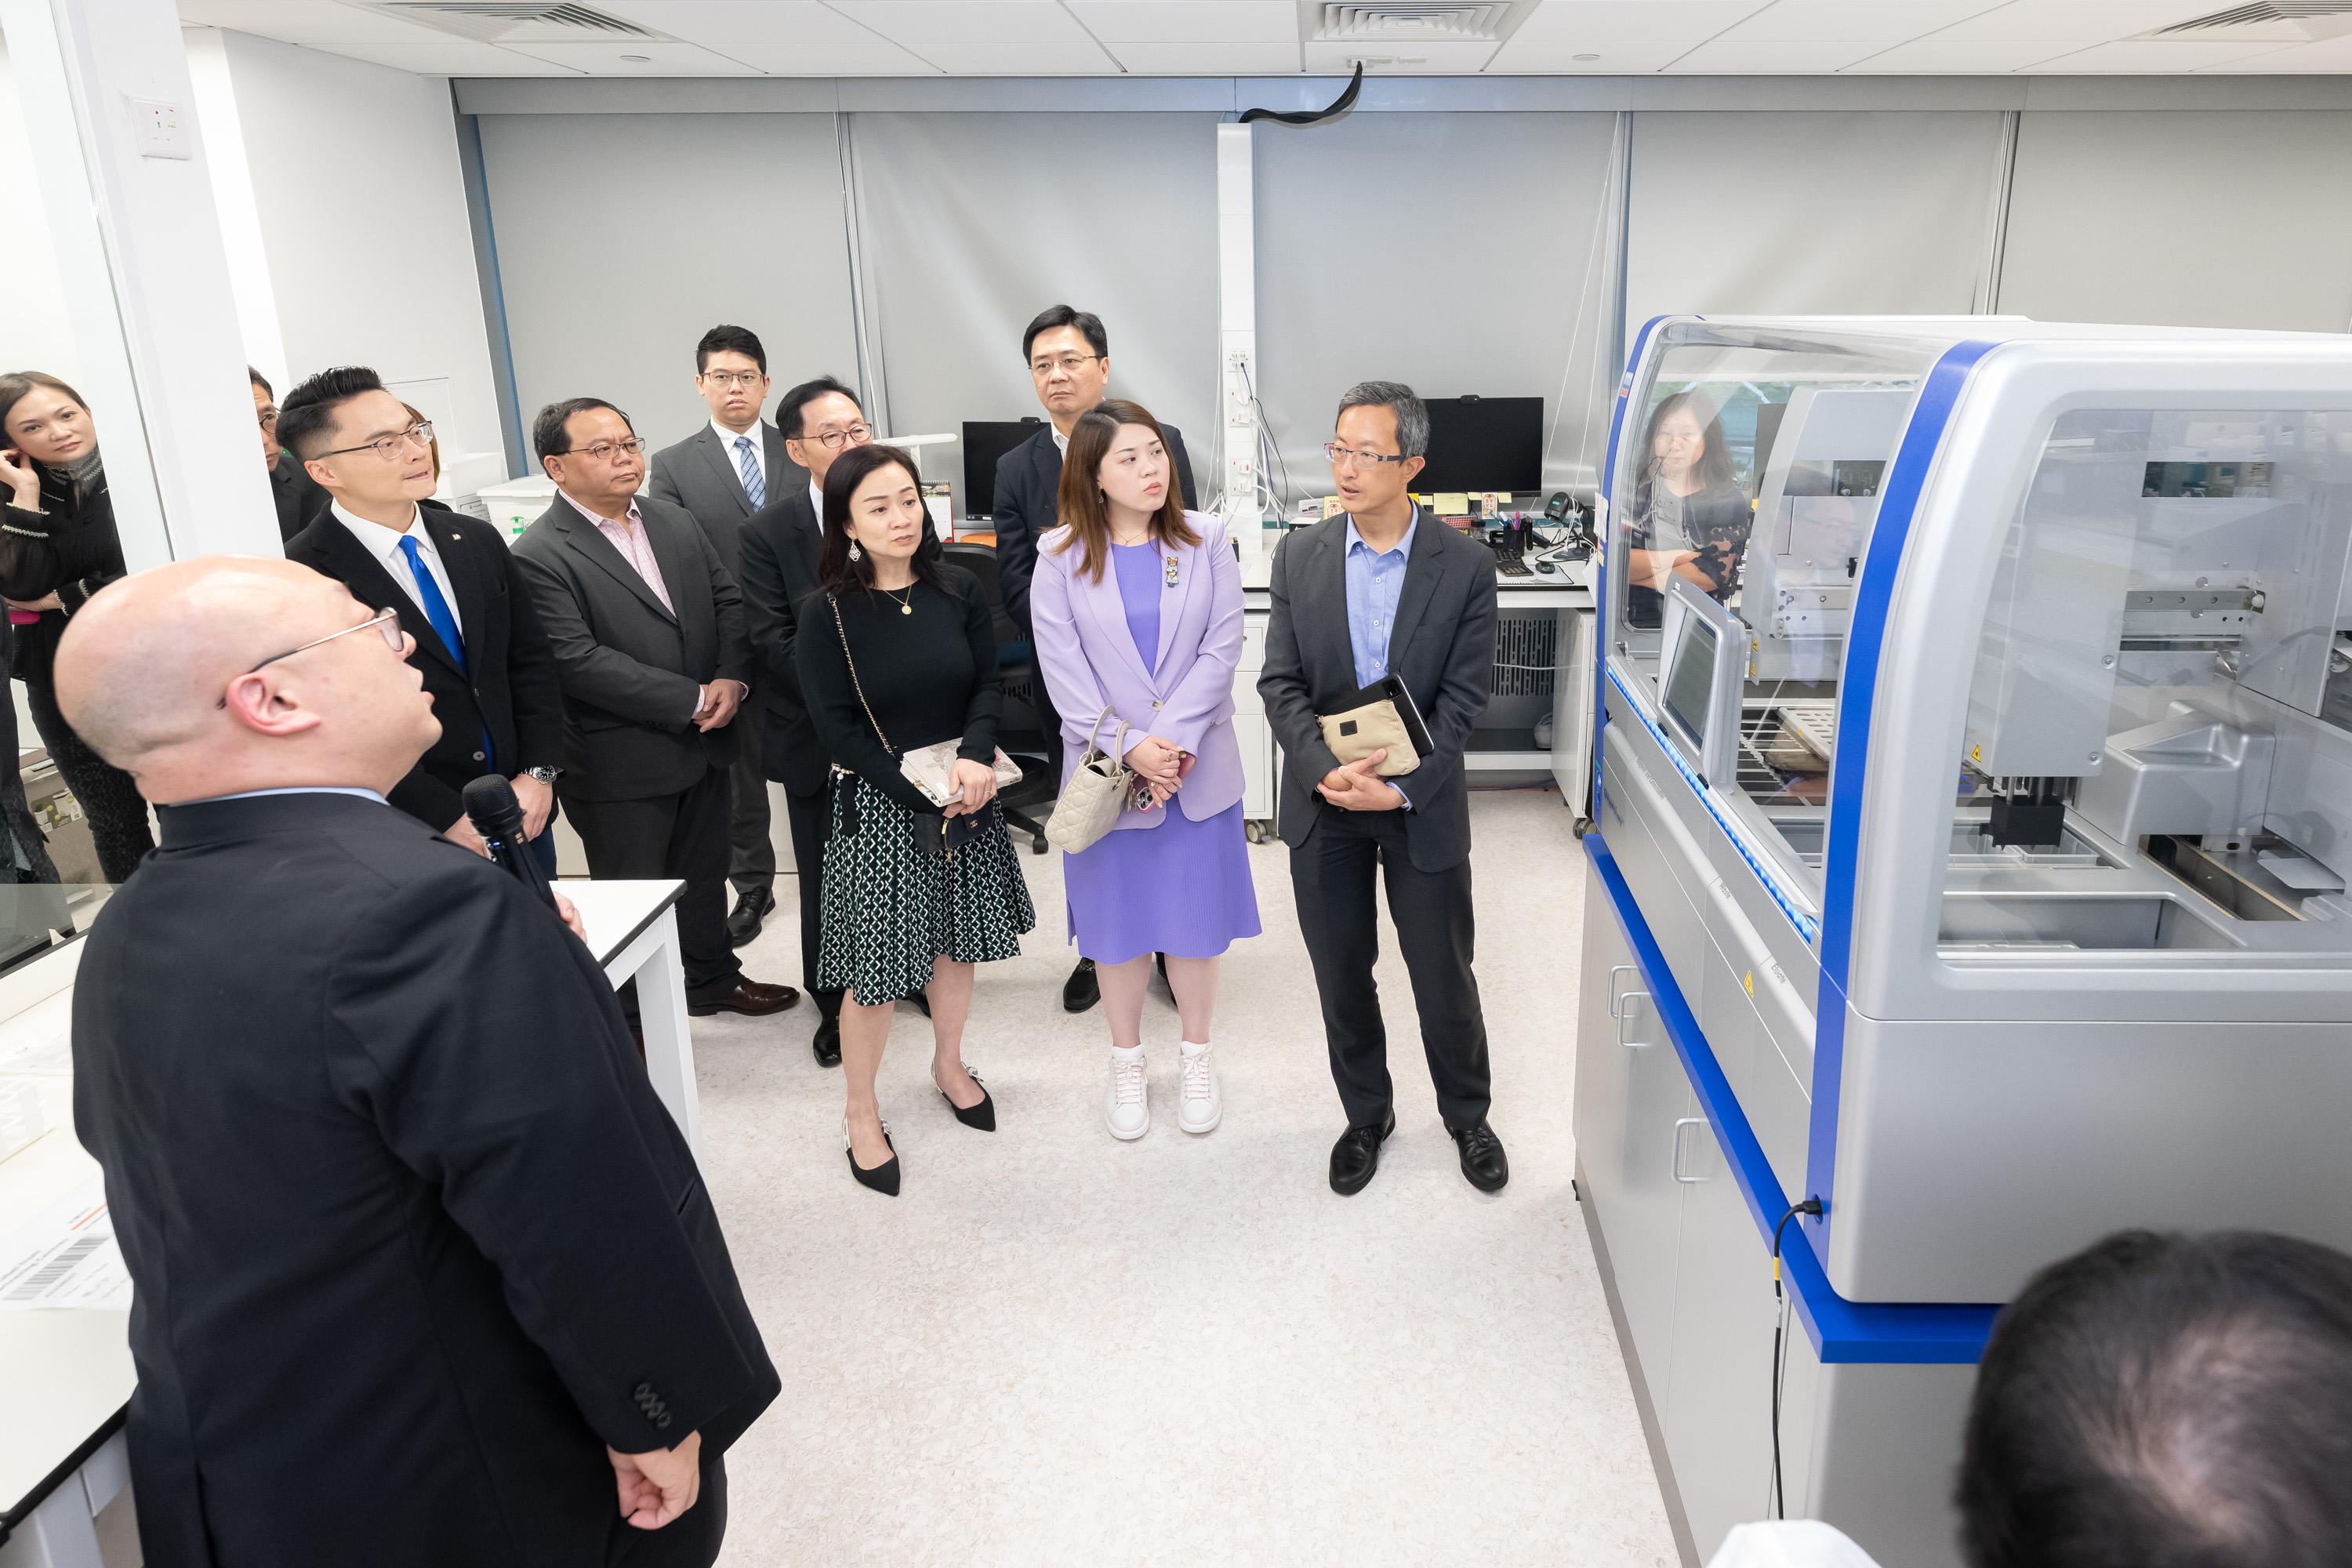 The Legislative Council (LegCo) Panel on Health Services visits the Hong Kong Genome Institute today (May 2). Photos shows LegCo Members touring the Genomic Laboratory.
